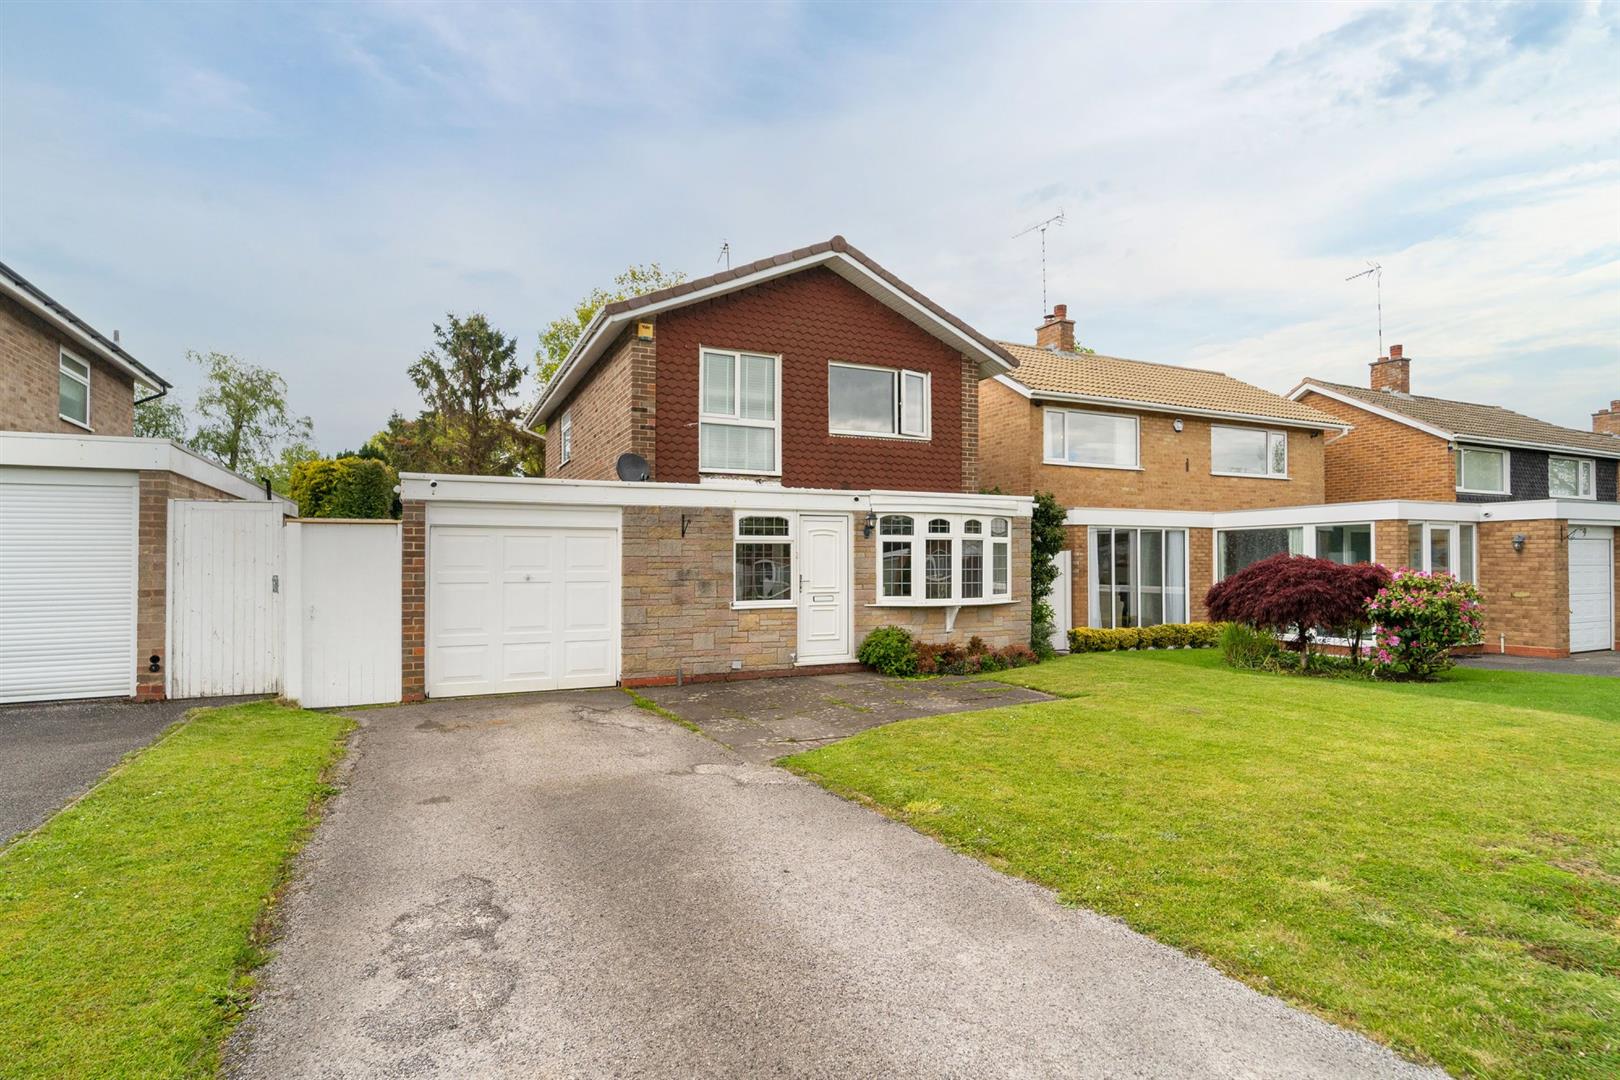 3 bed  for sale in Baxterley Green, Solihull, B91 